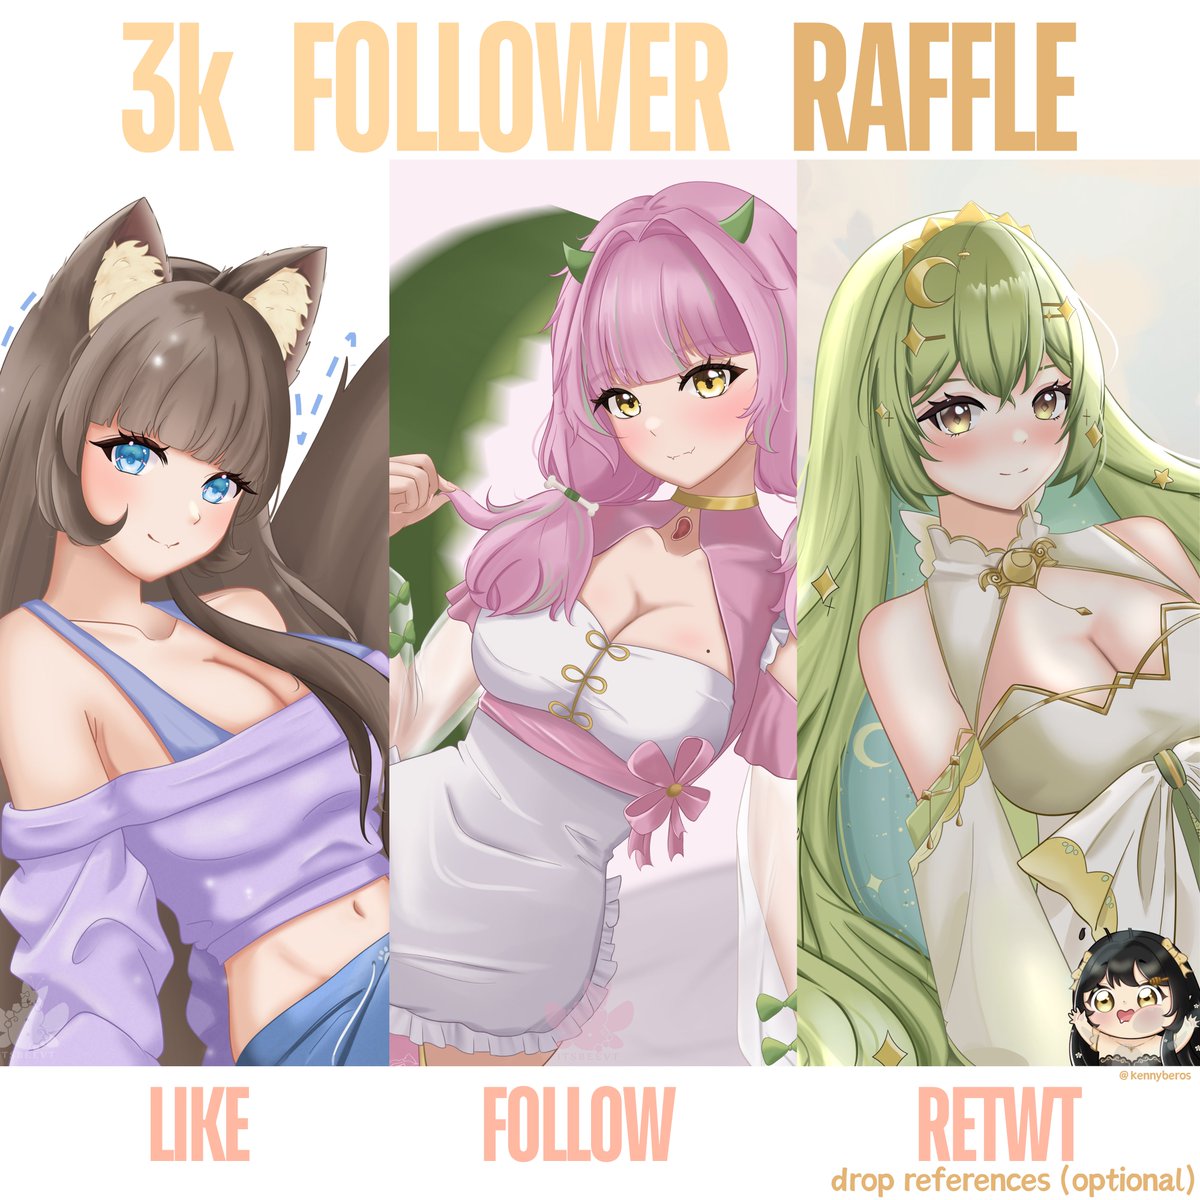 Thank you for 3k!! T^T I'm so eternally grateful for everyone and would like to offer a thigh up illustration for 1 person!! every 150 retweets I'll add another person :D 

💛 LIKE + FOLLOW + RTWT
💛 Drop References (opt)
💛 Ends June 5th